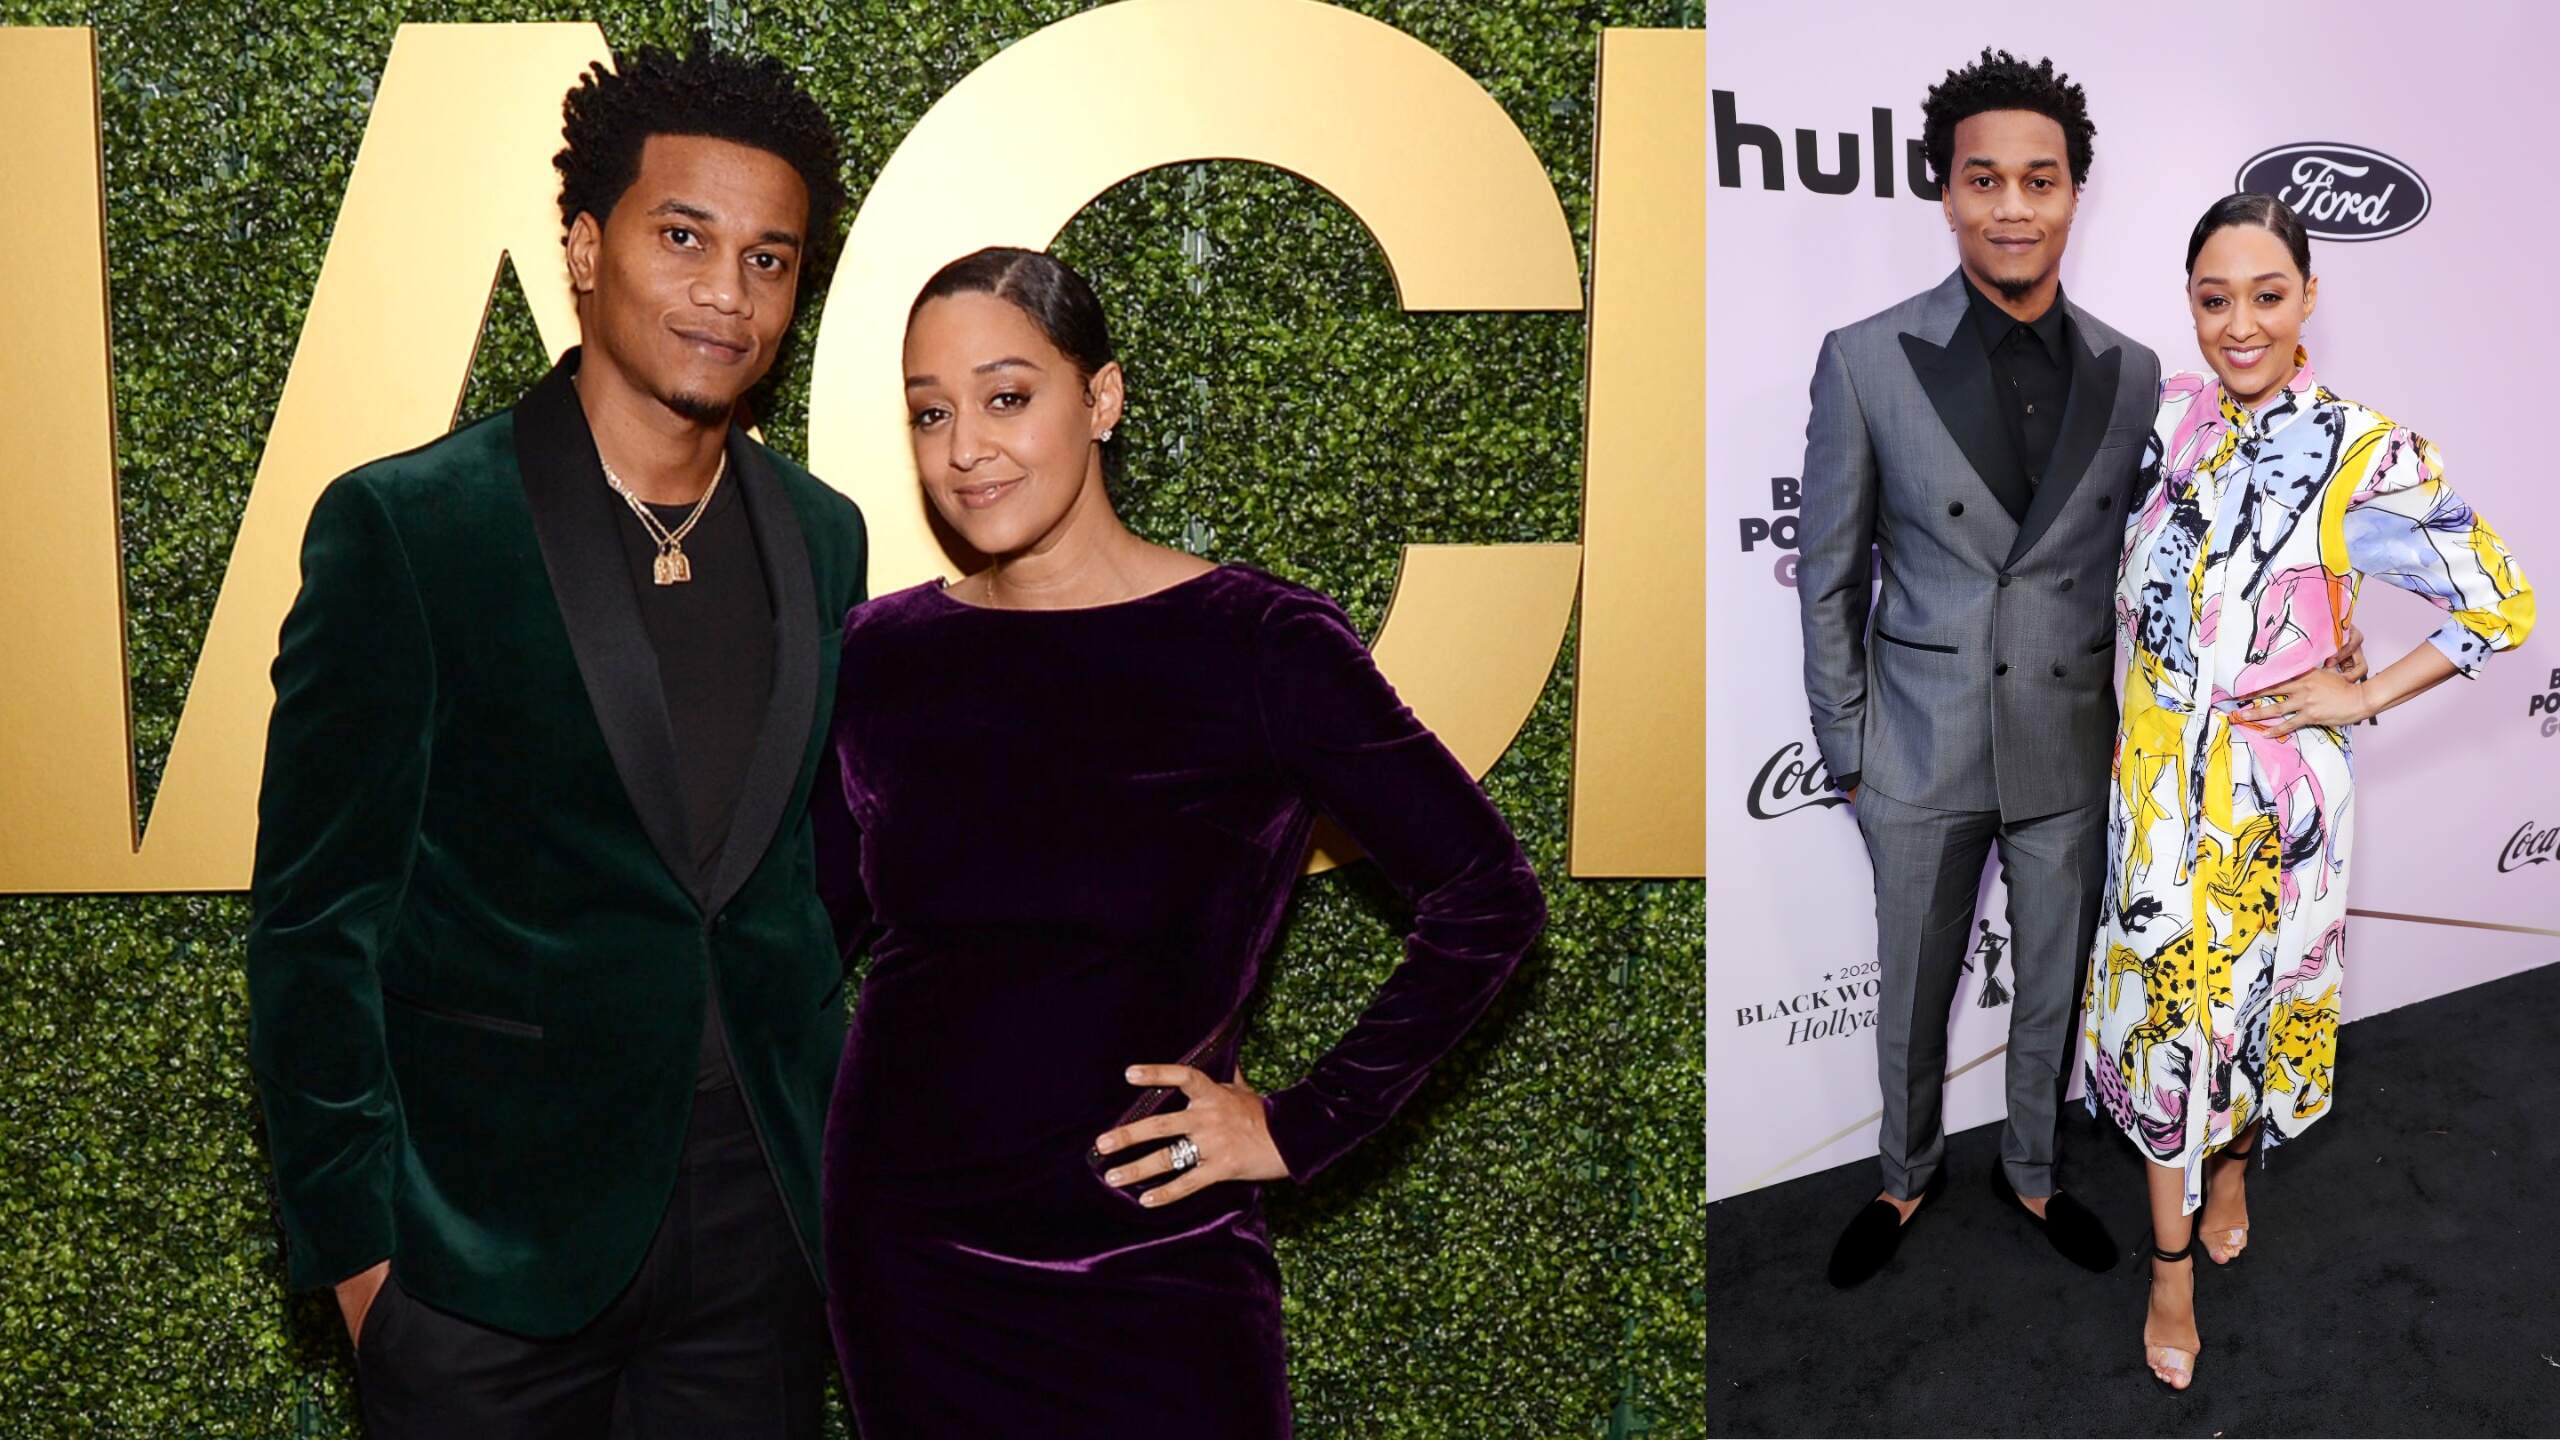 Wearing a green tuxedo, Cory Hardrict attends the 2020 MACRO Pre-Oscar Party with his then-wife Tia Mowry